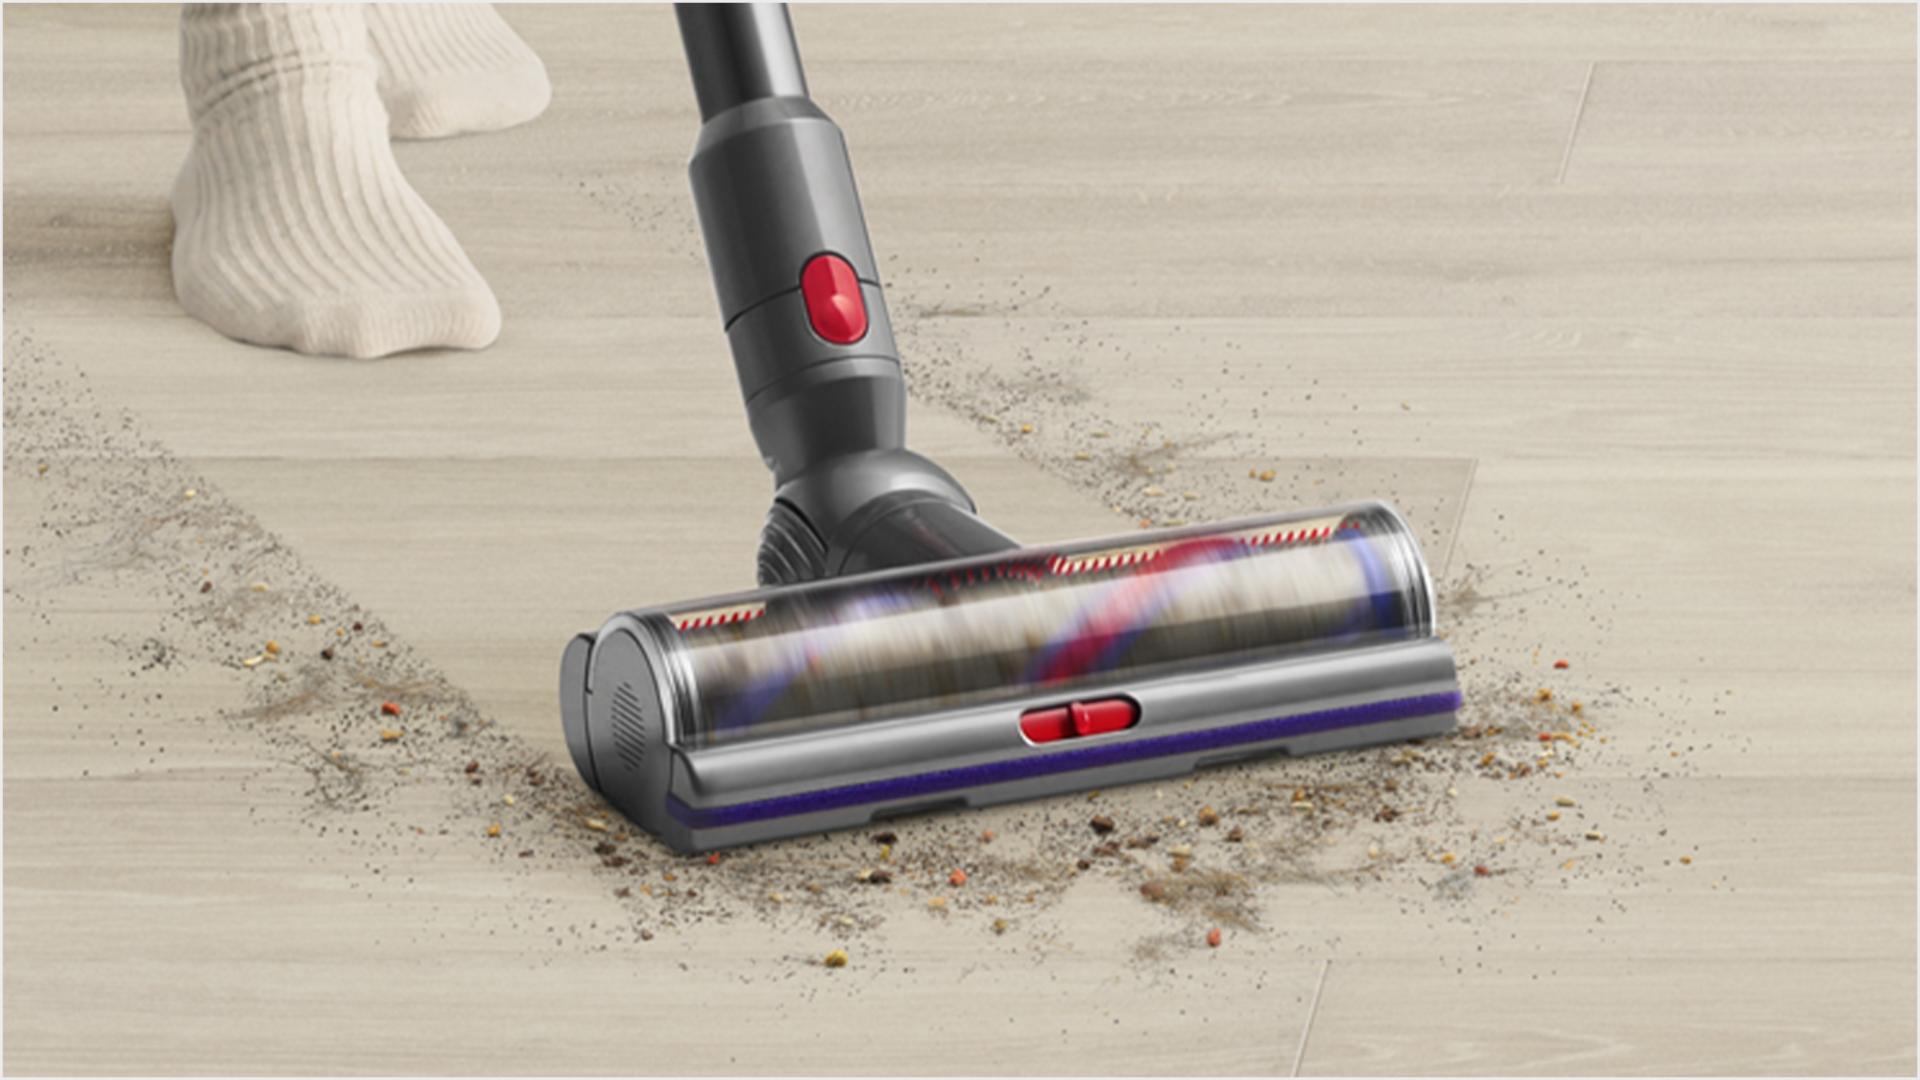 Dyson Motorbar cleaner head deep cleaning hair from a carpet